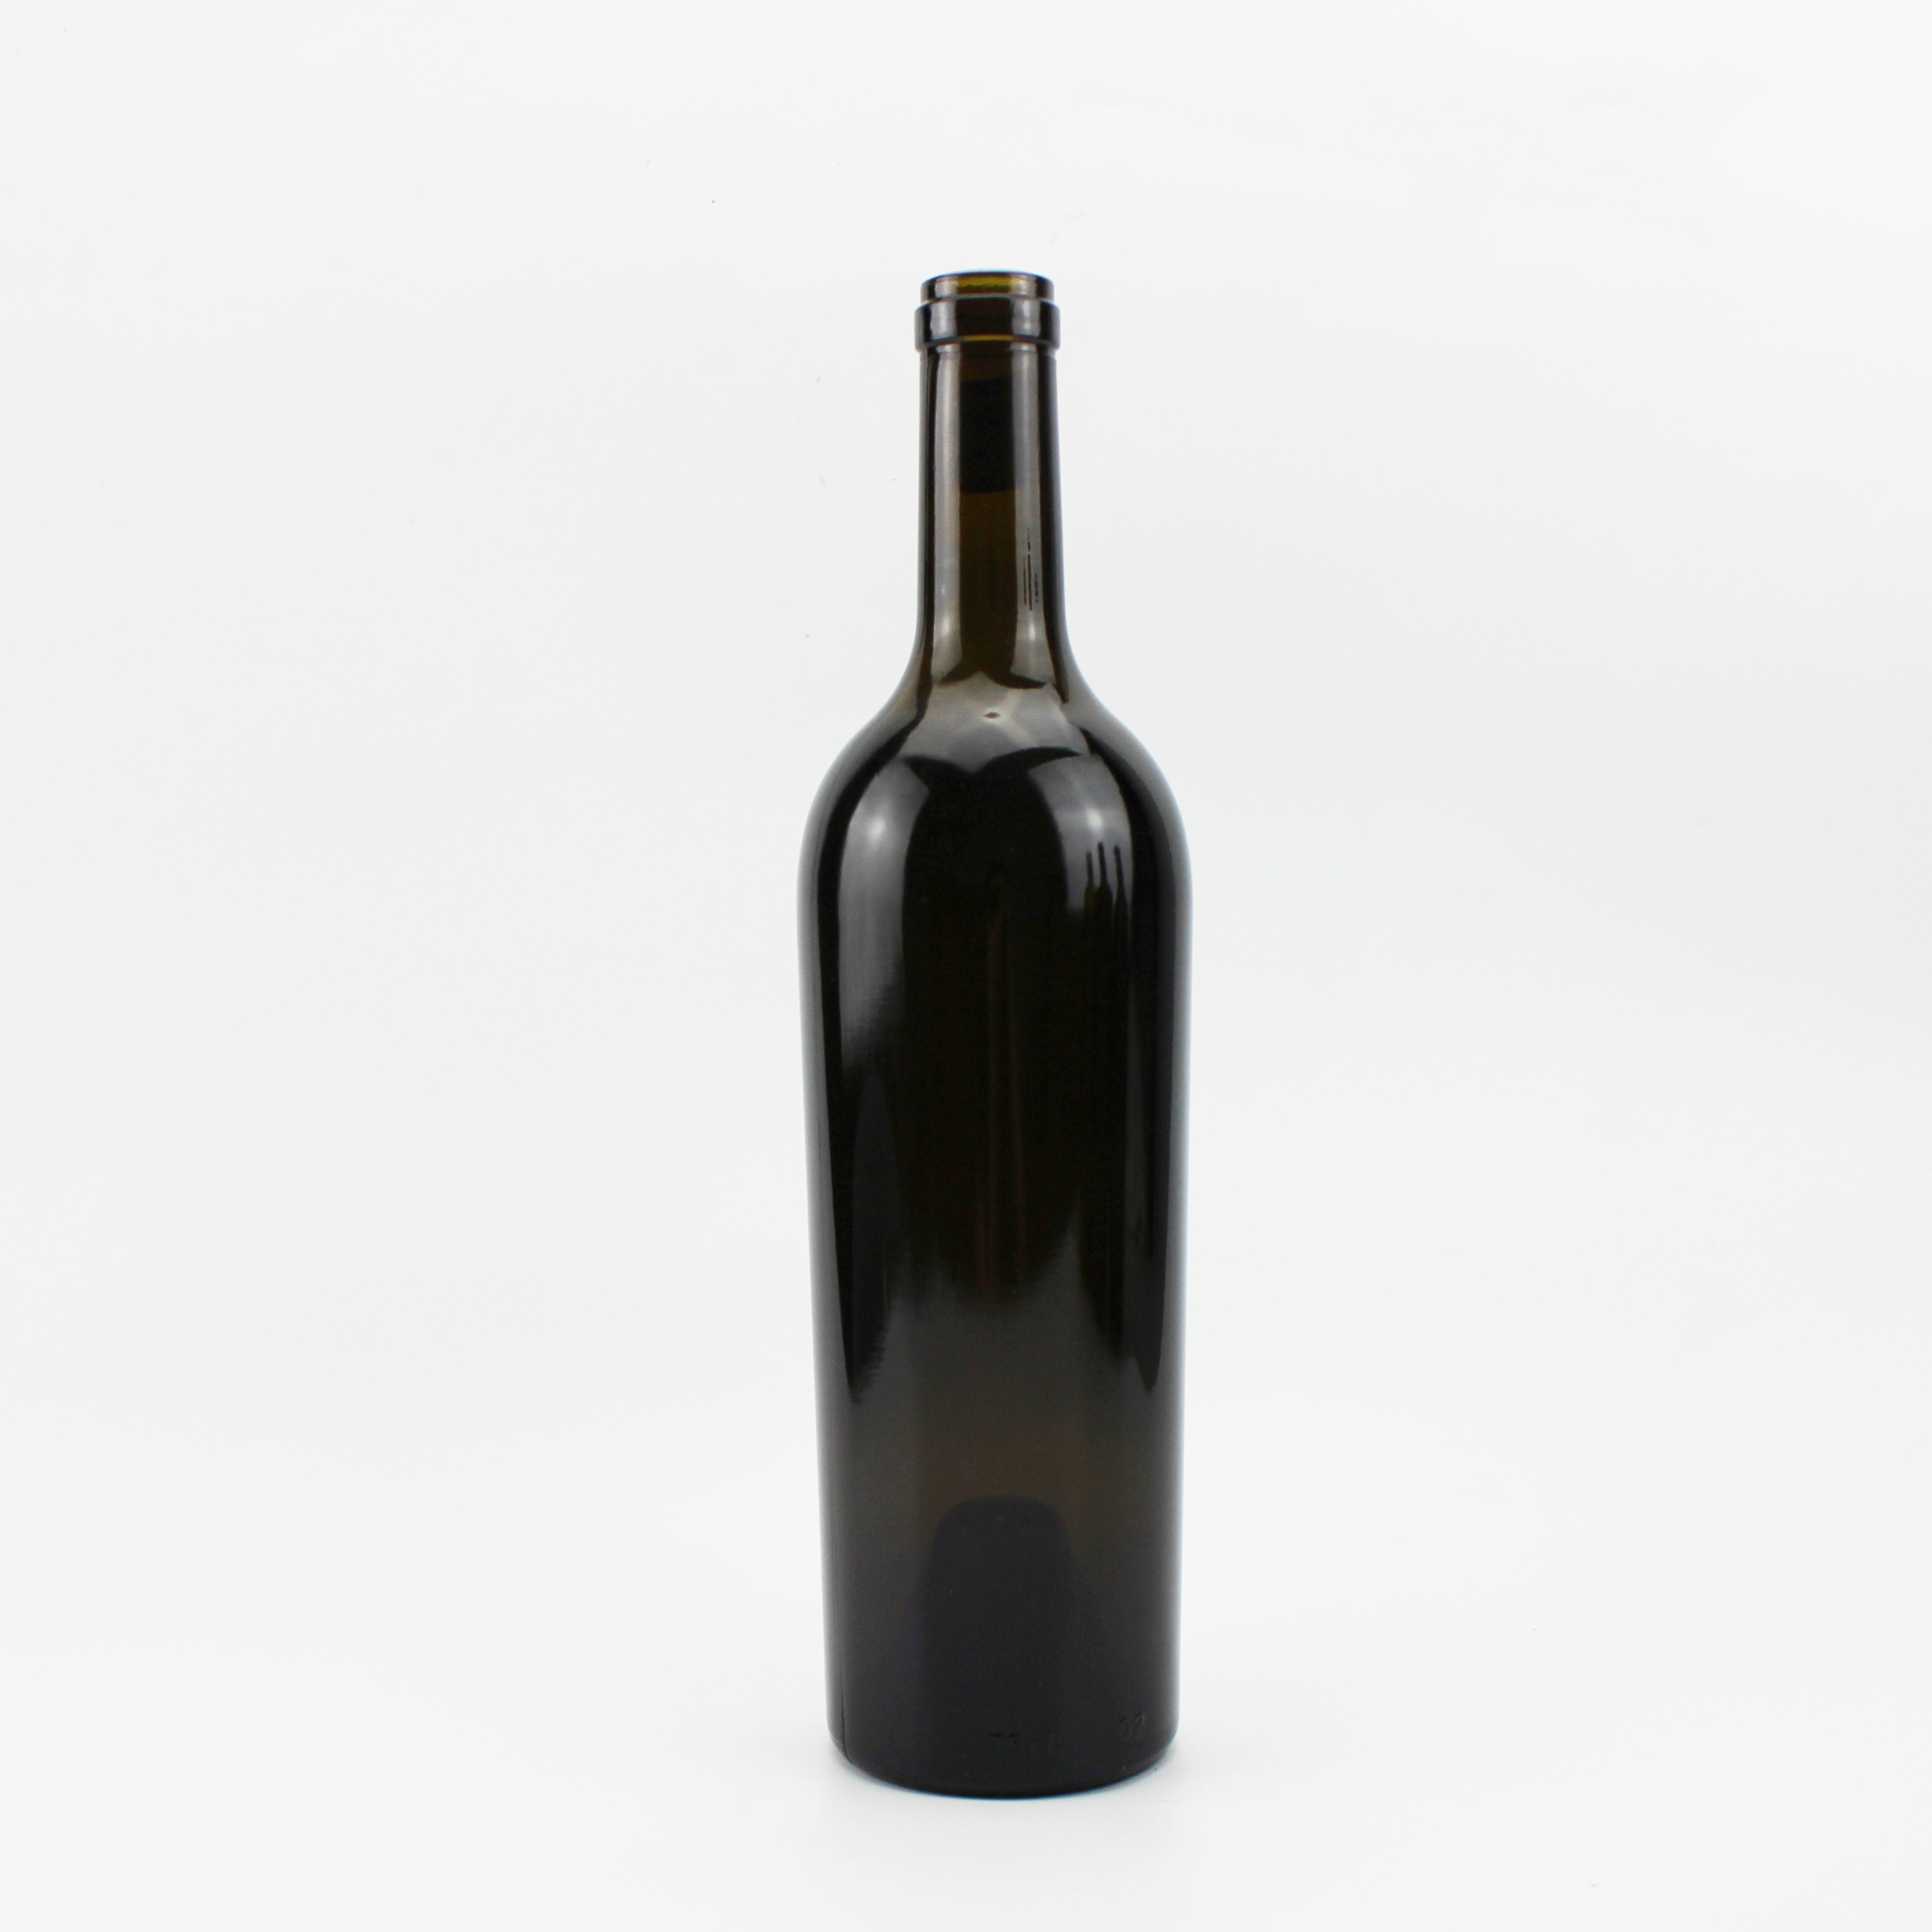  750ML GLASS BOTTLE FOR WINE ANTIQUE GREEN COLOR HIGH QUALITY